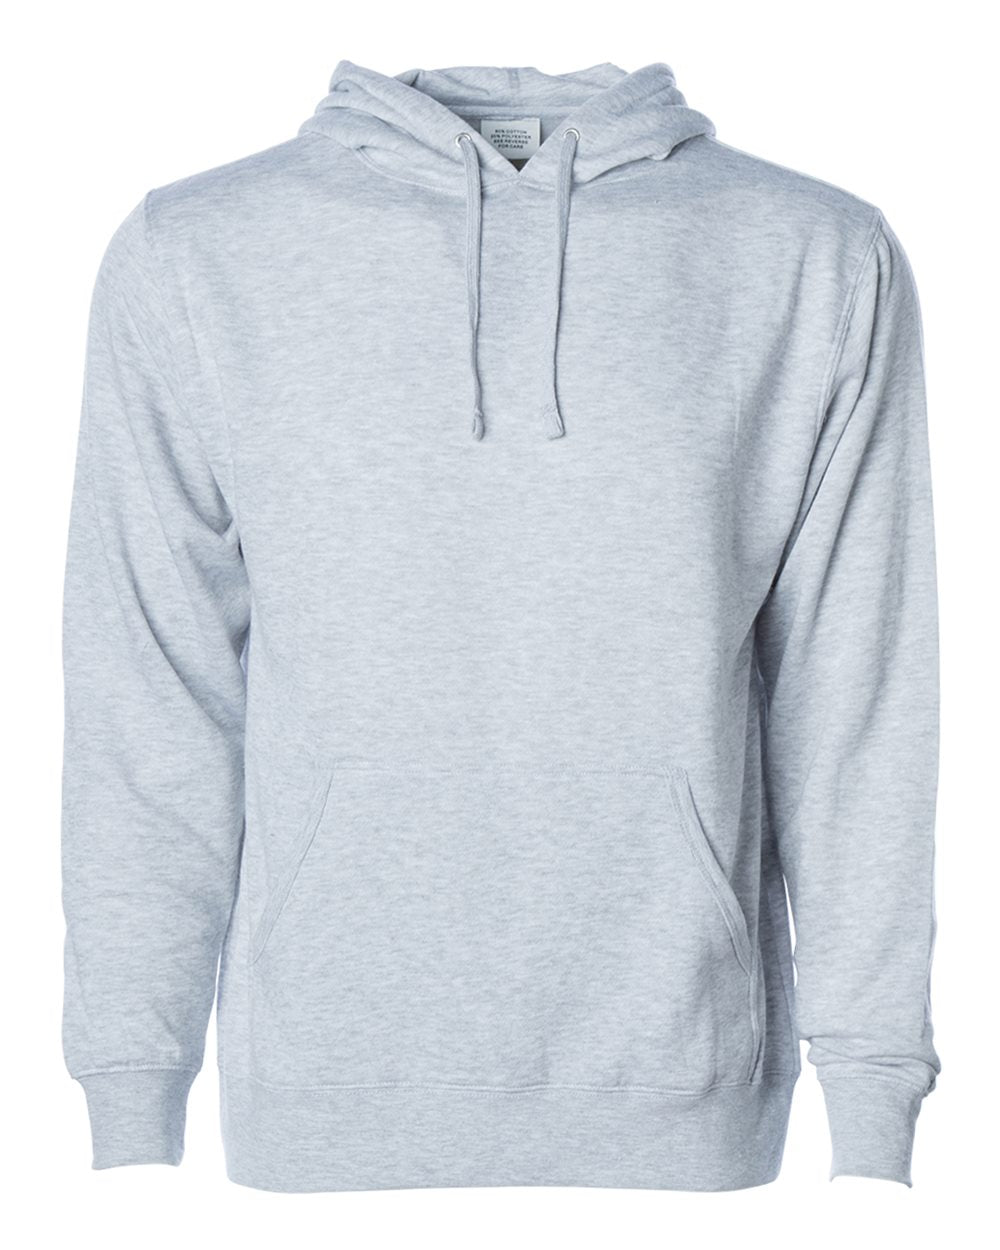 Independent Trading Co. - Hooded Sweatshirt